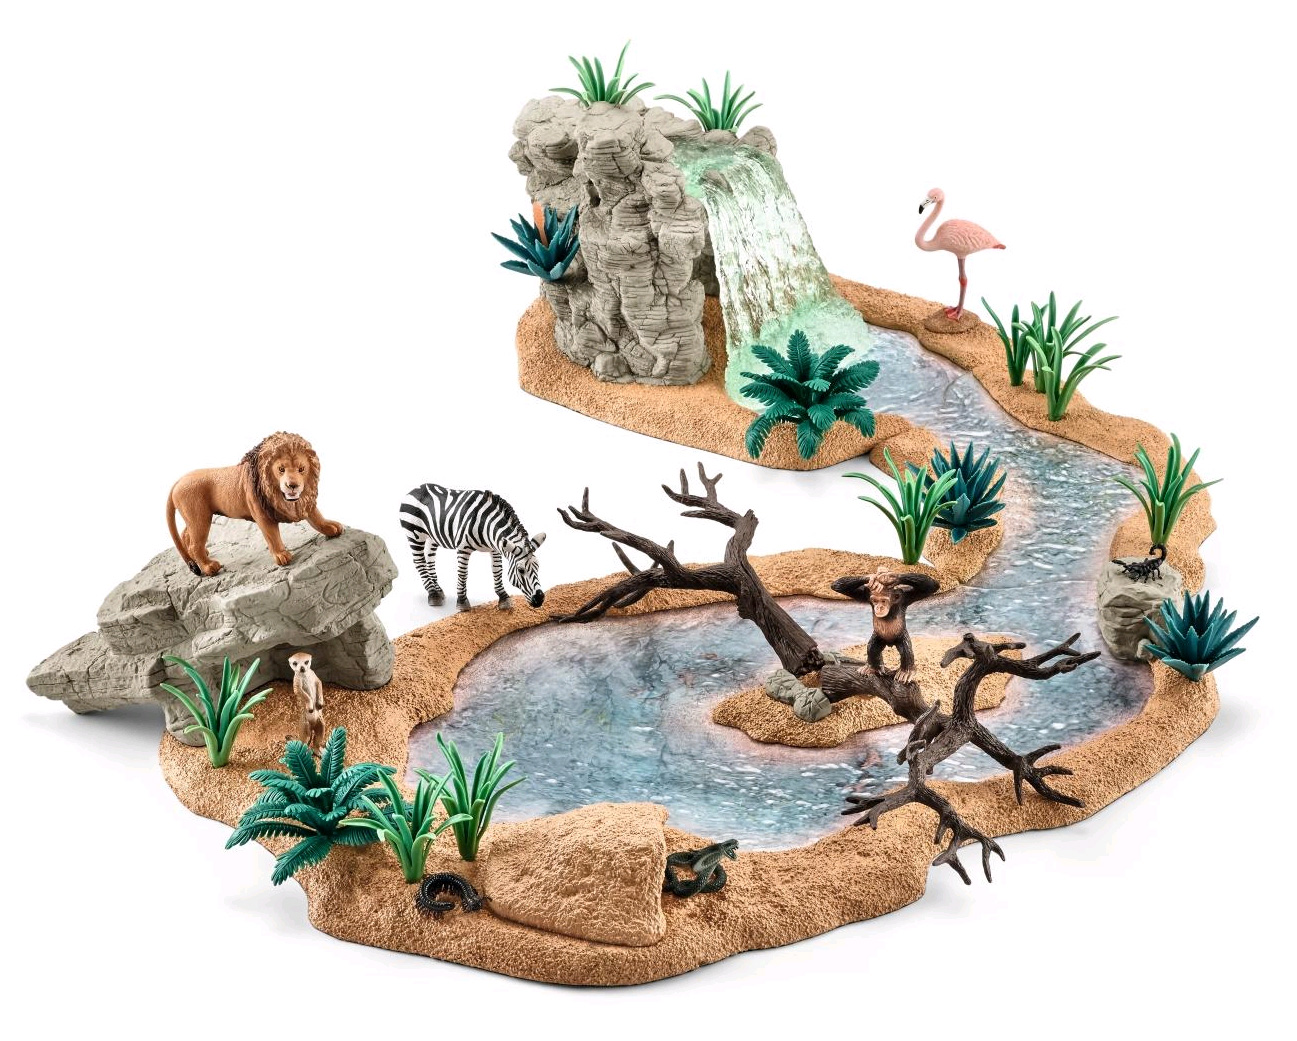 schleich big adventure at the watering hole set